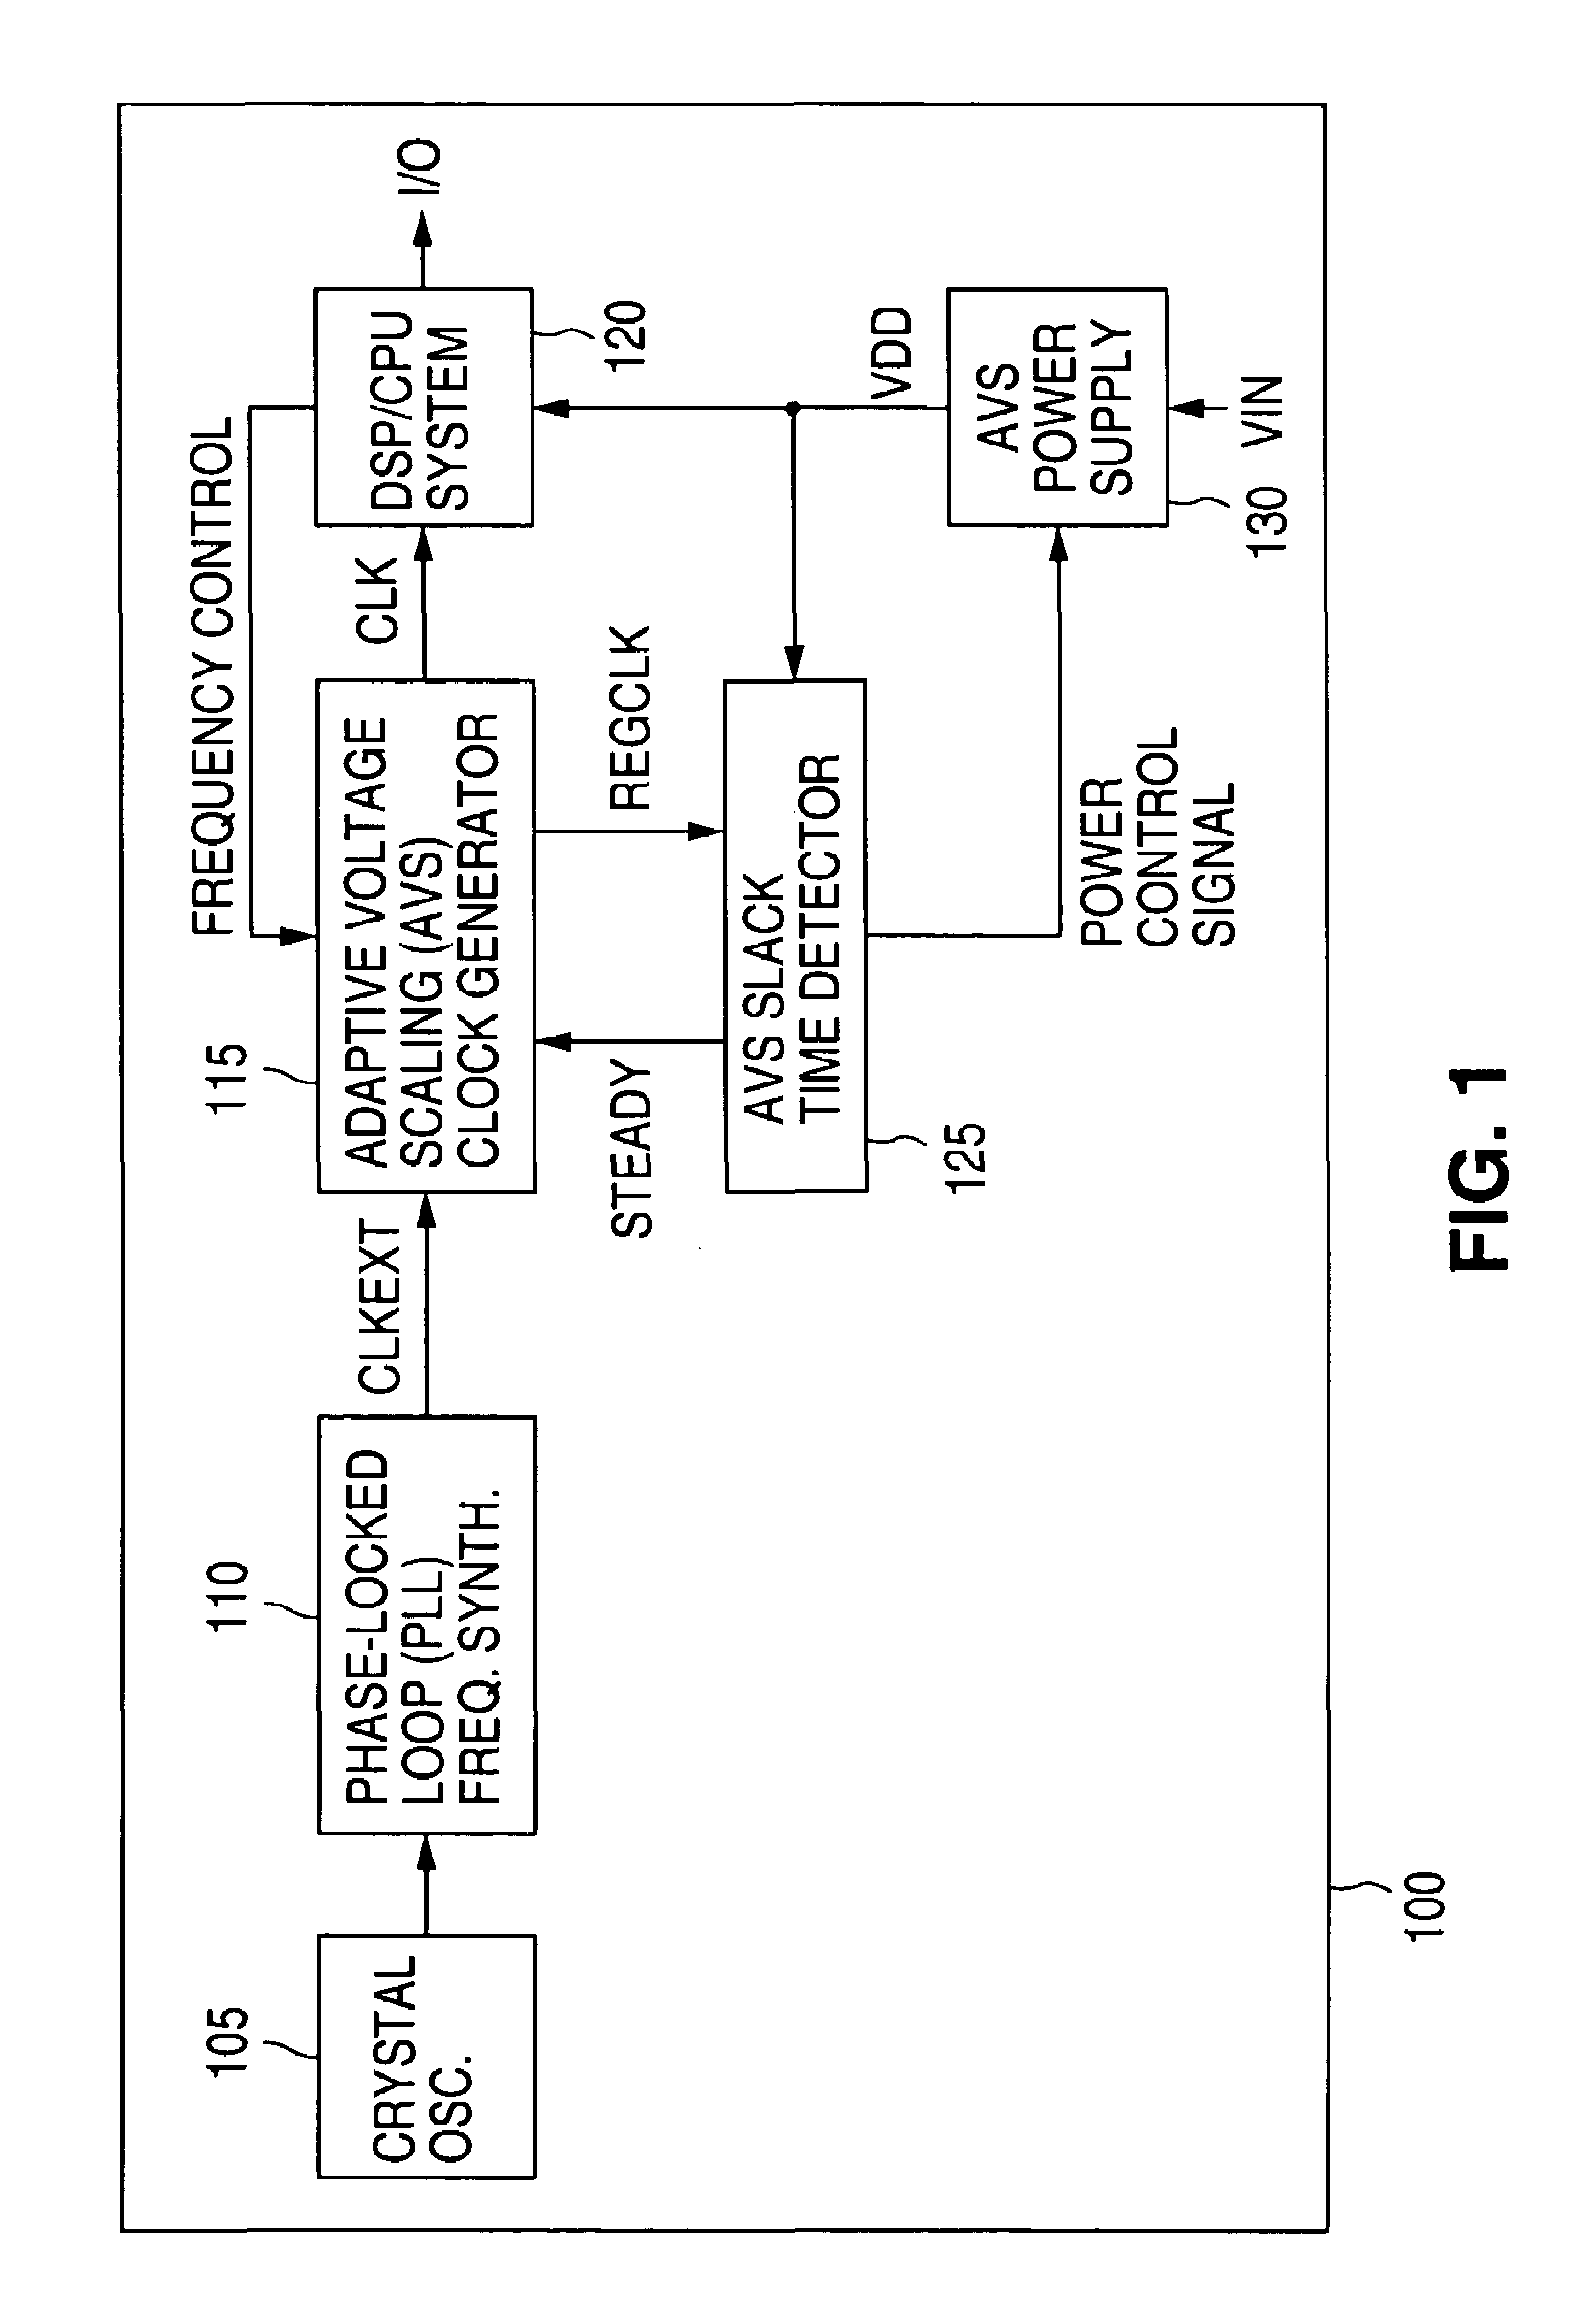 Adaptive voltage scaling clock generator for use in a digital processing component and method of operating the same